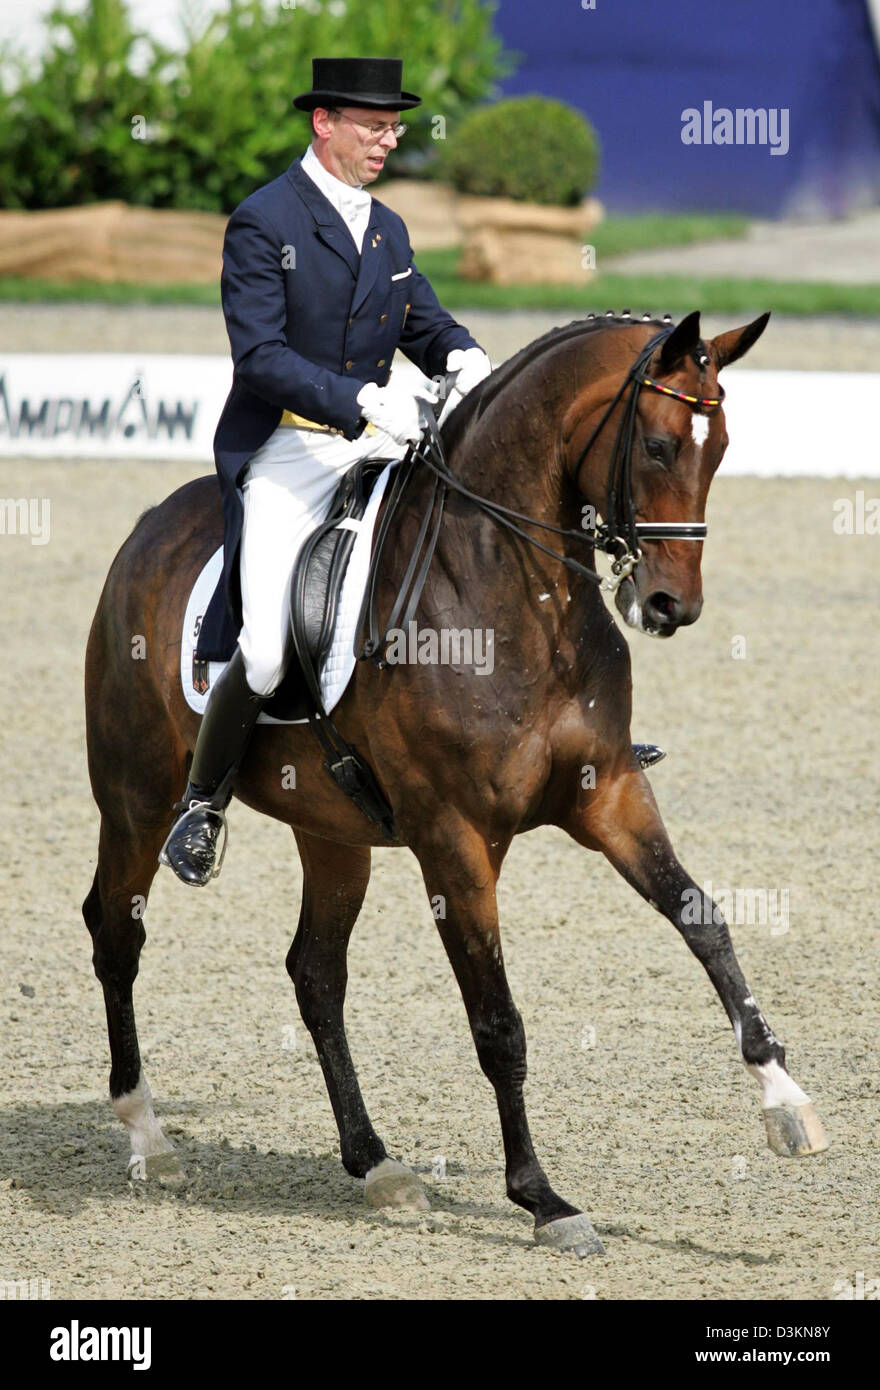 (dpa) - German dressage horseman Klaus Husenbeth pictured at his single tryout with his horse 'Piccolino' at the Dressage European Championships in Hagen, Germany, Saturday 30 July 2005. The Dressage European Championships will last until Sunday 31 July 2005.. Photo: Friso Gentsch Stock Photo